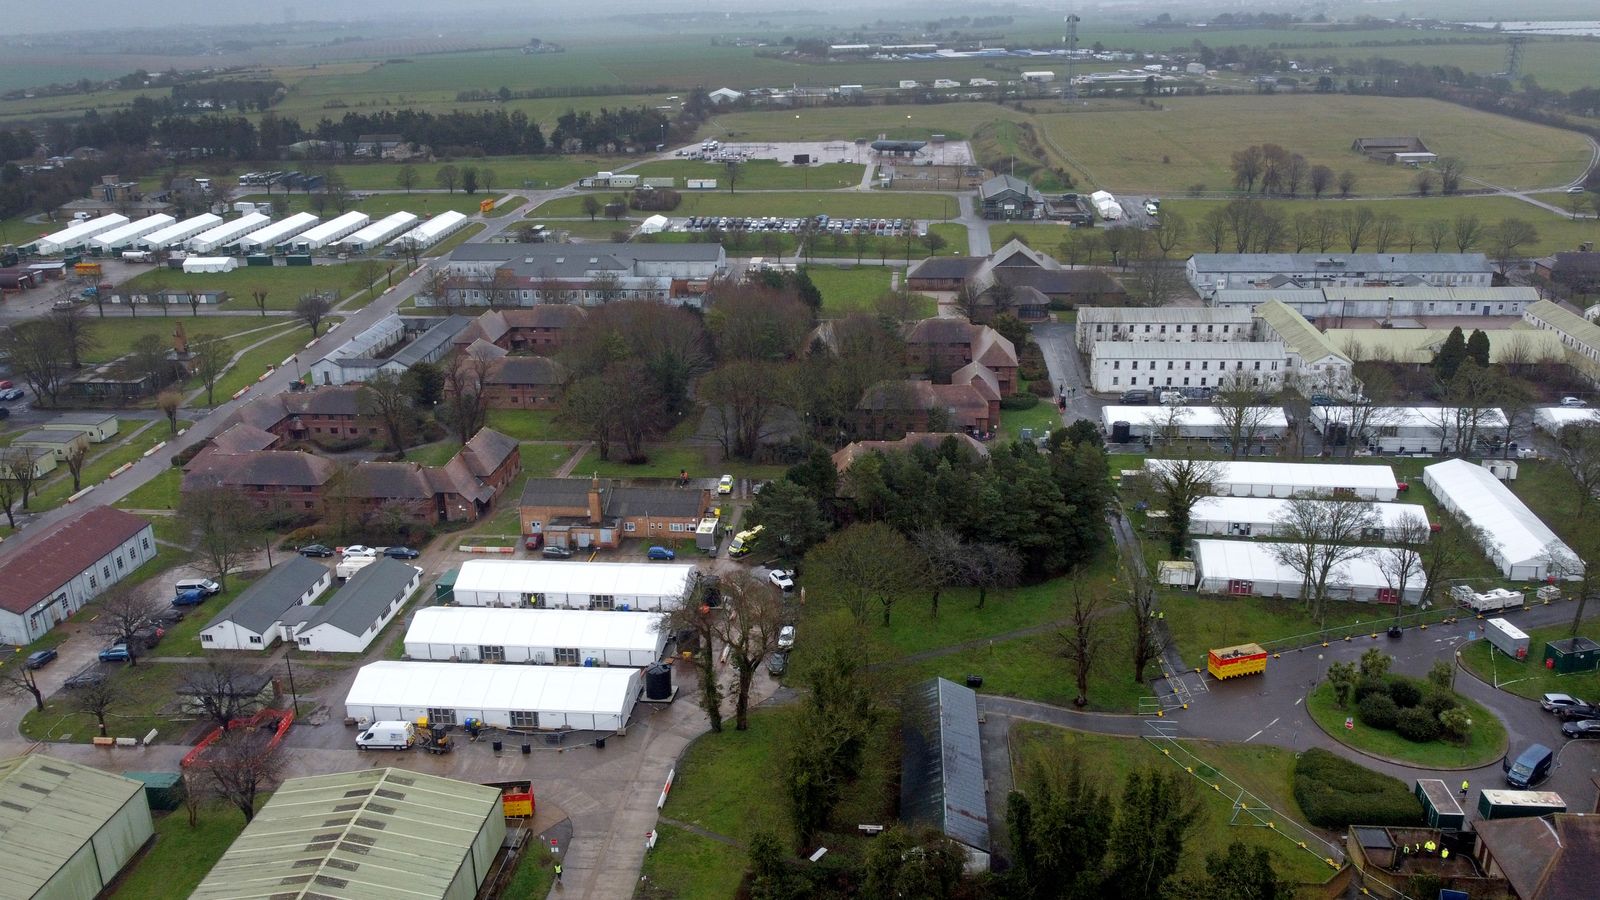 Government plans to house migrants in marquees across country